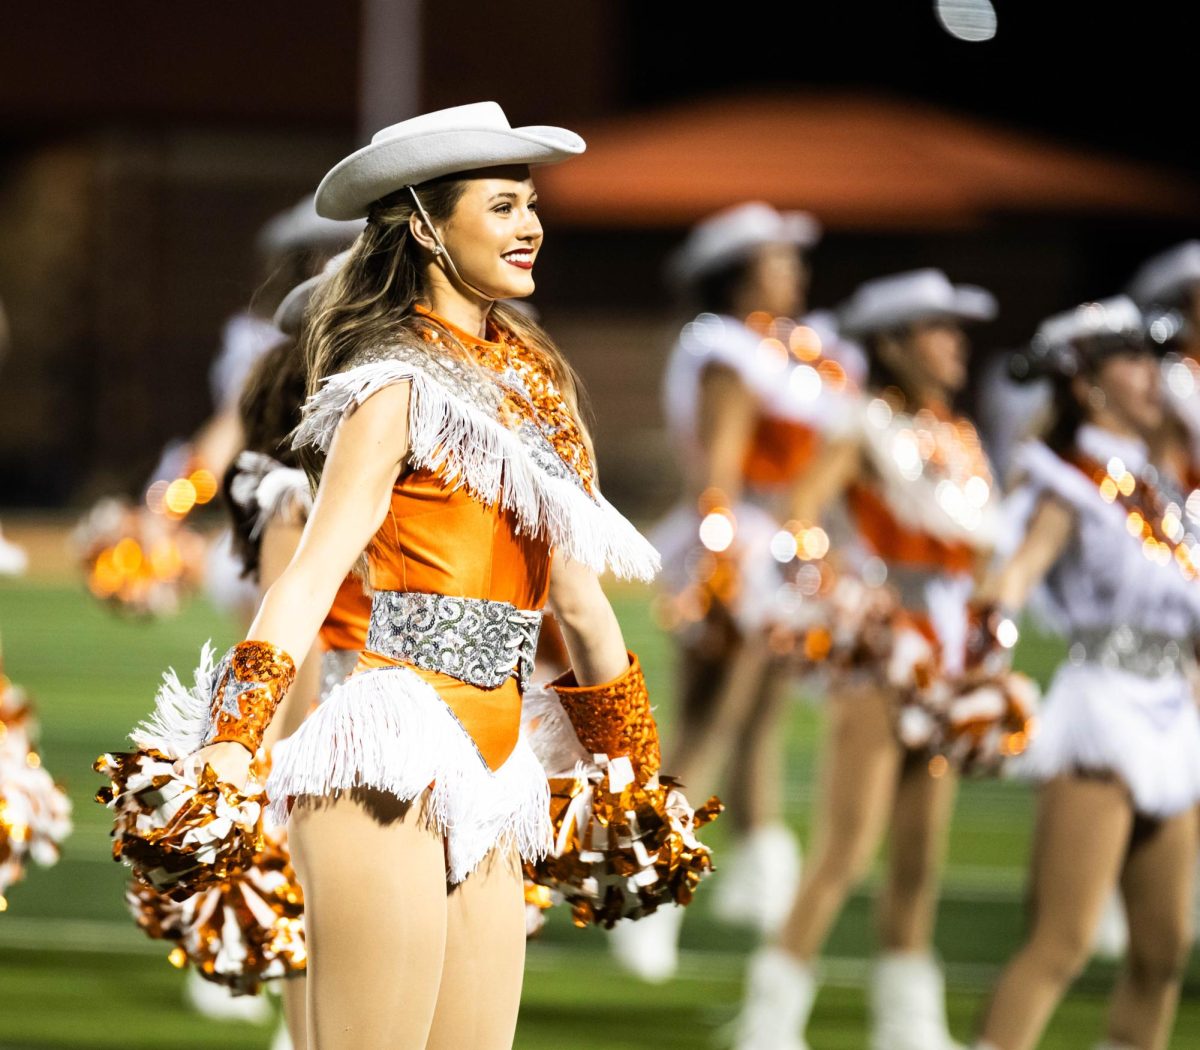 Senior HighStepper Kennedi McHenry smiles during the Texas halftime performance Friday, Sept. 8, 2023. The HighSteppers performed a pom routine for their halftime showing. 